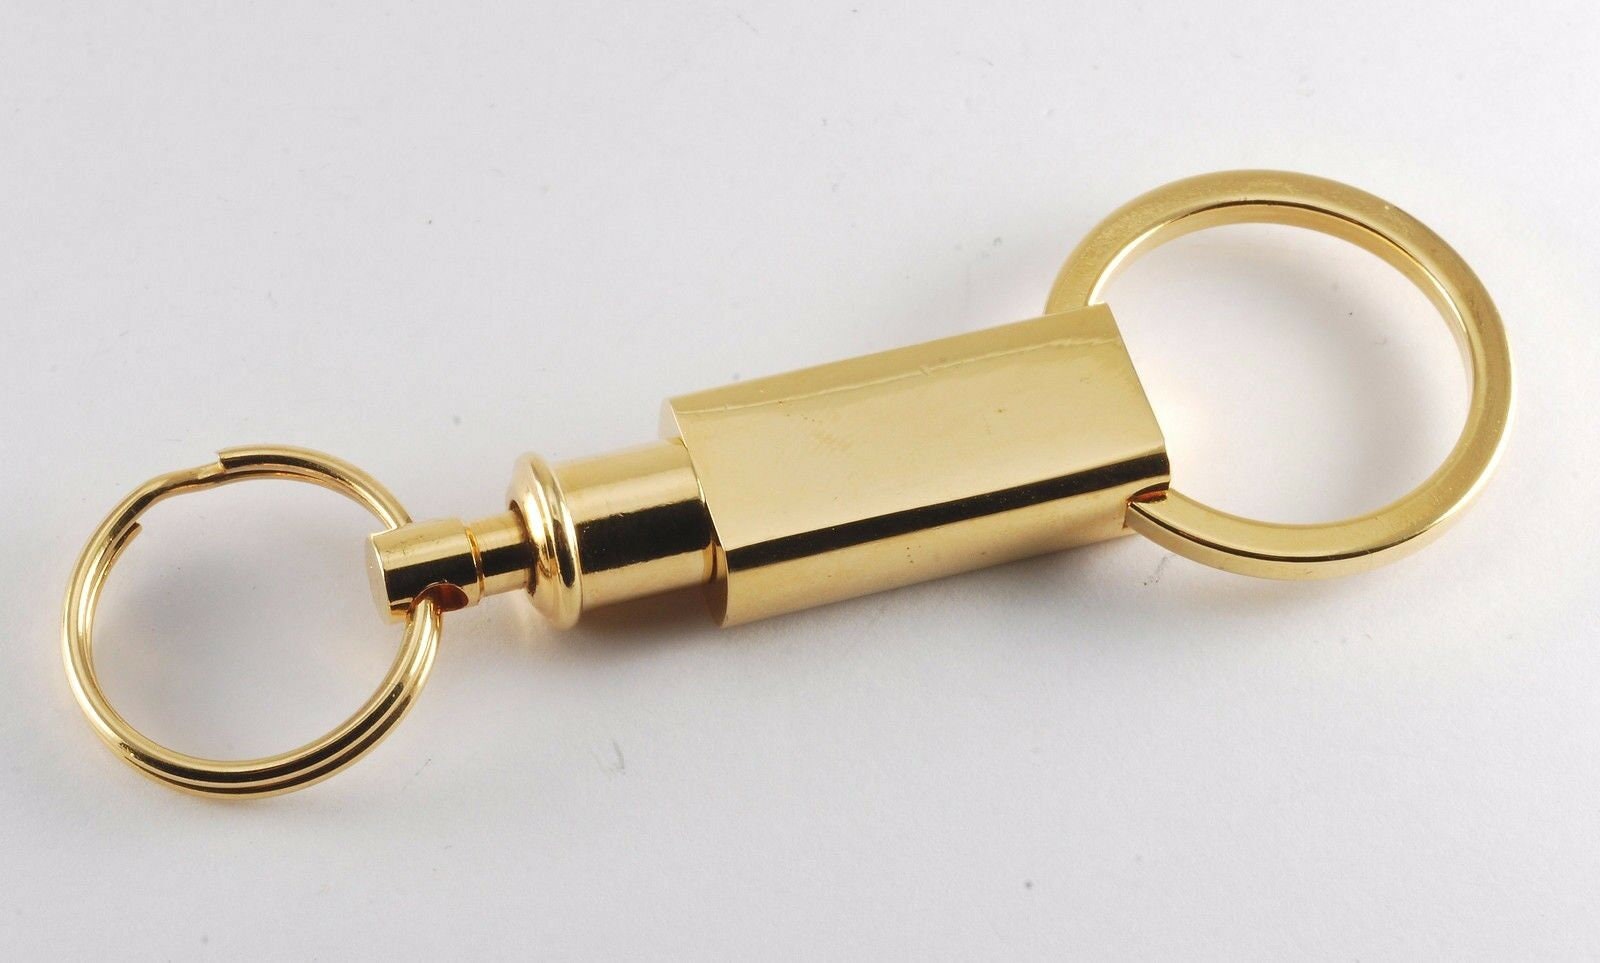 Retractable Badge Holder Key Chain With Keychain Ring Clip Metal Badge Reel  Carabiner Recoil 